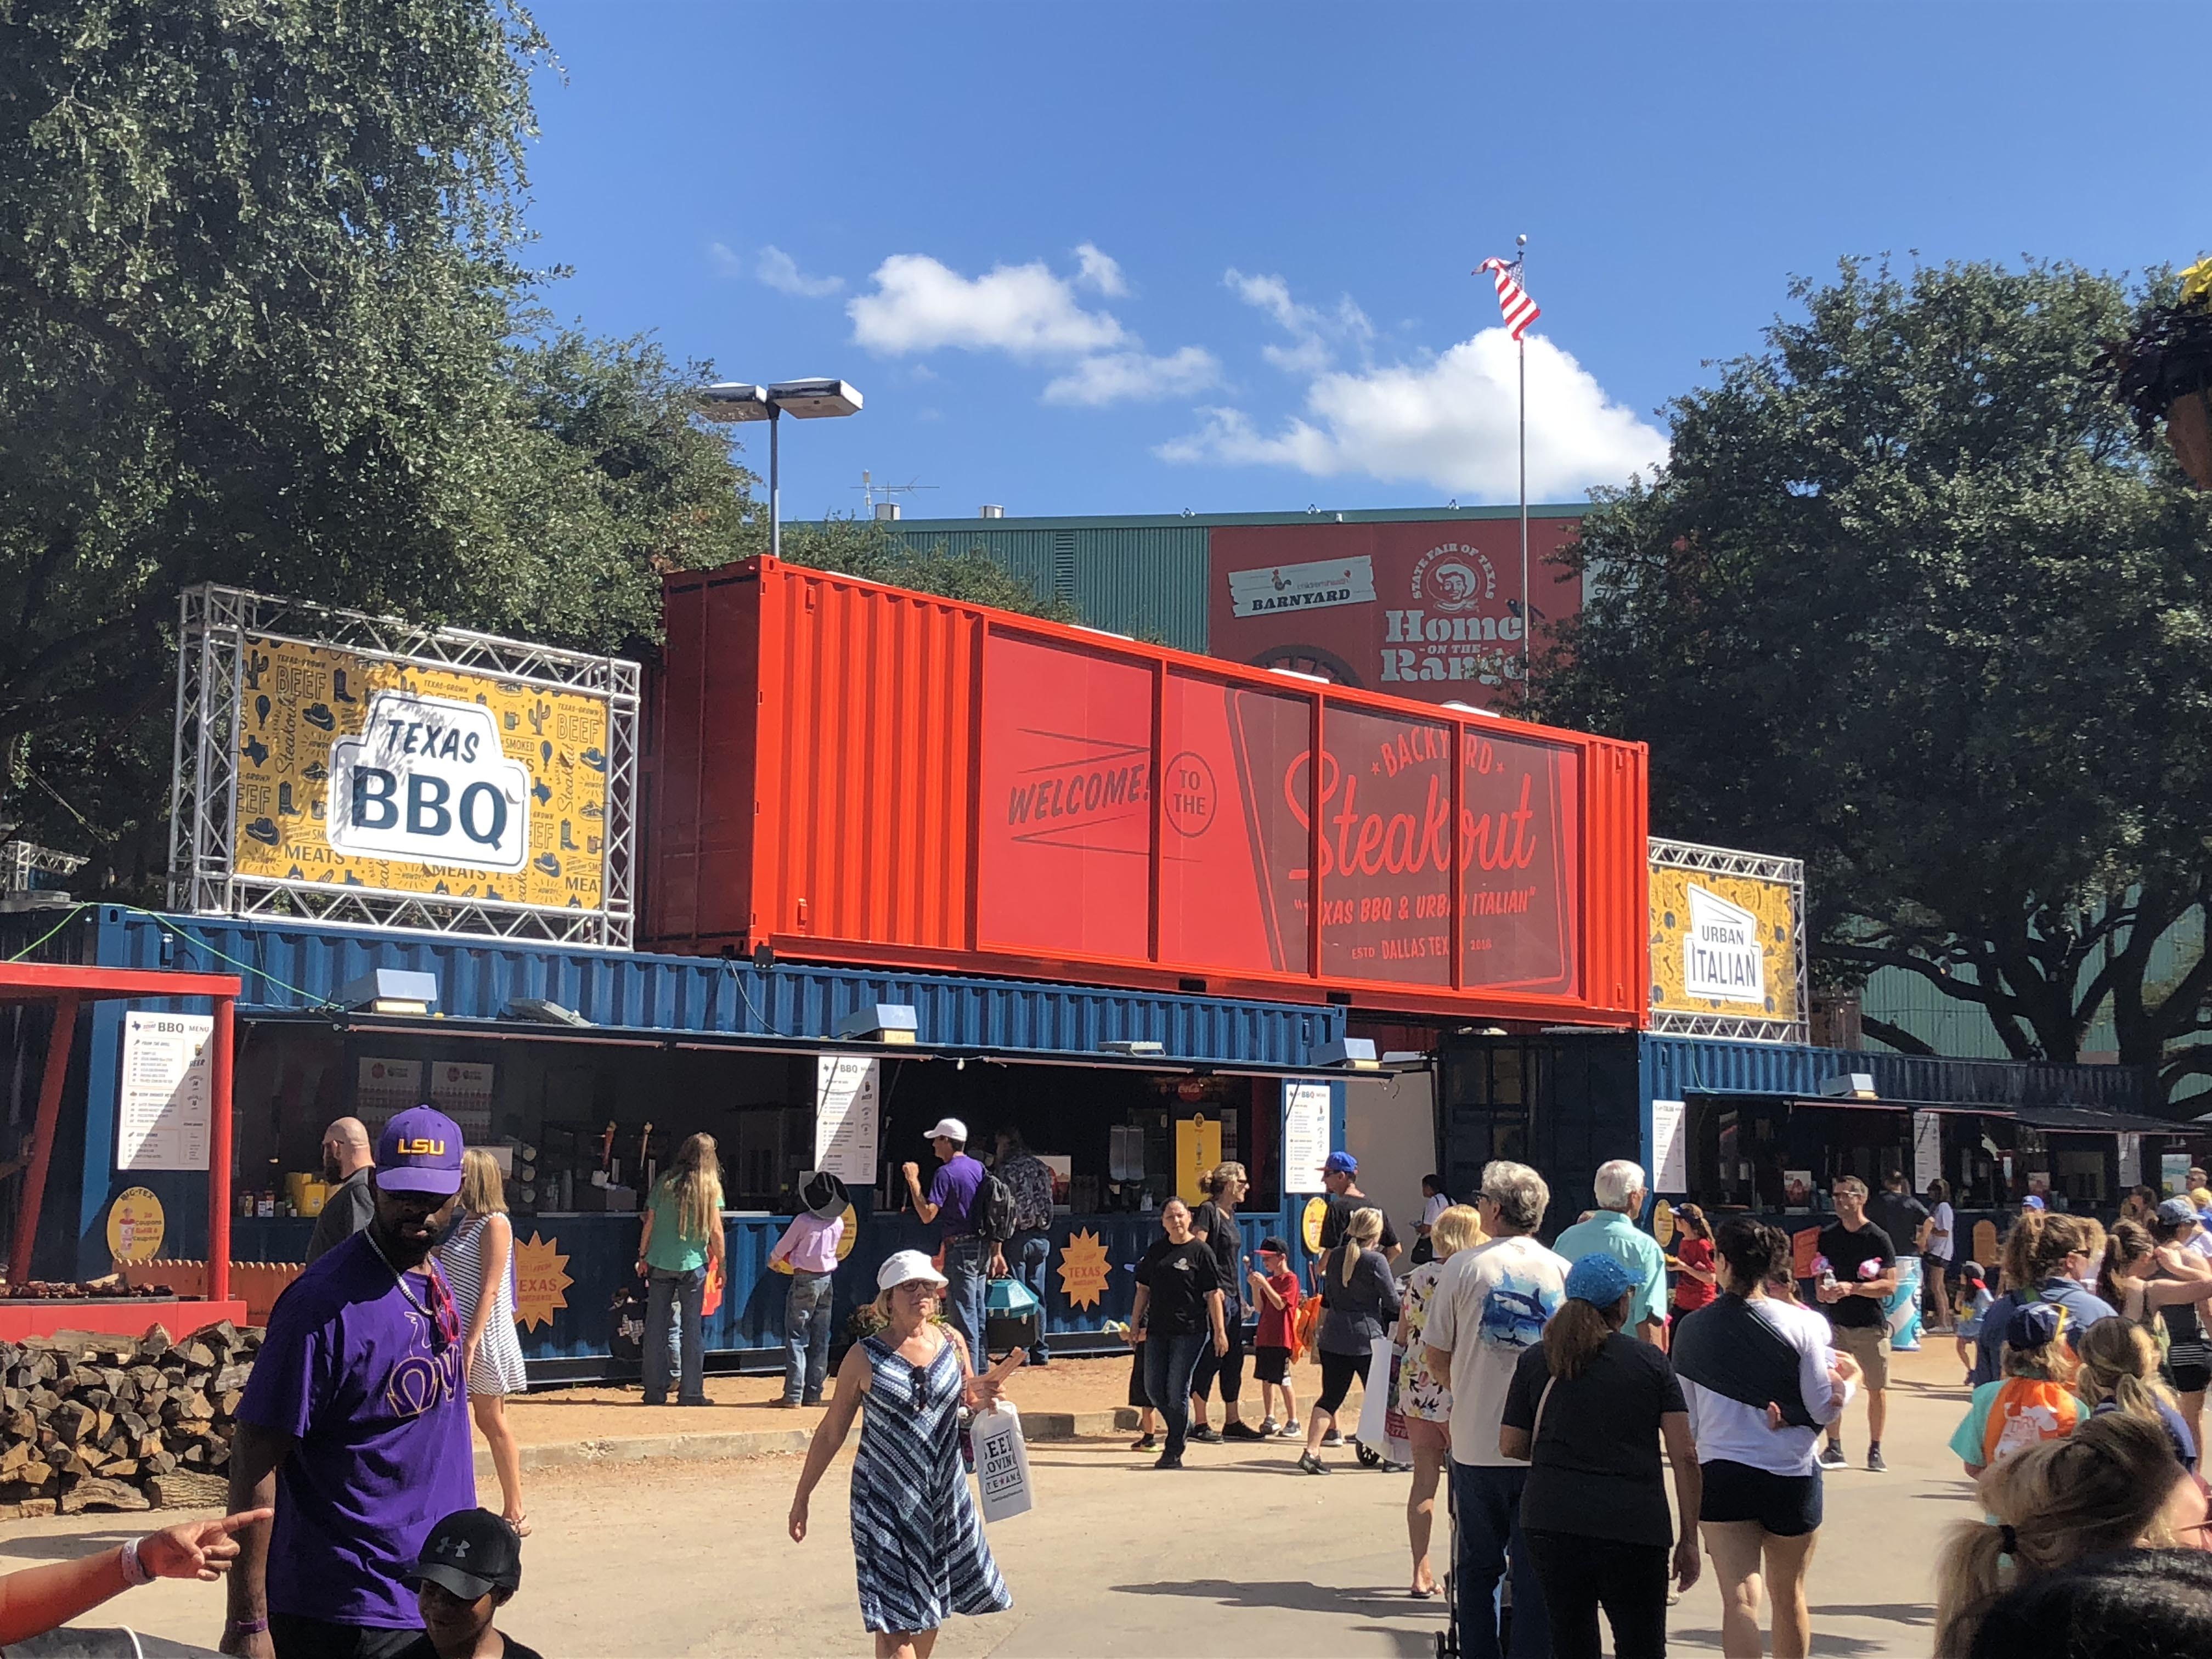 Shipping Container Restaurant